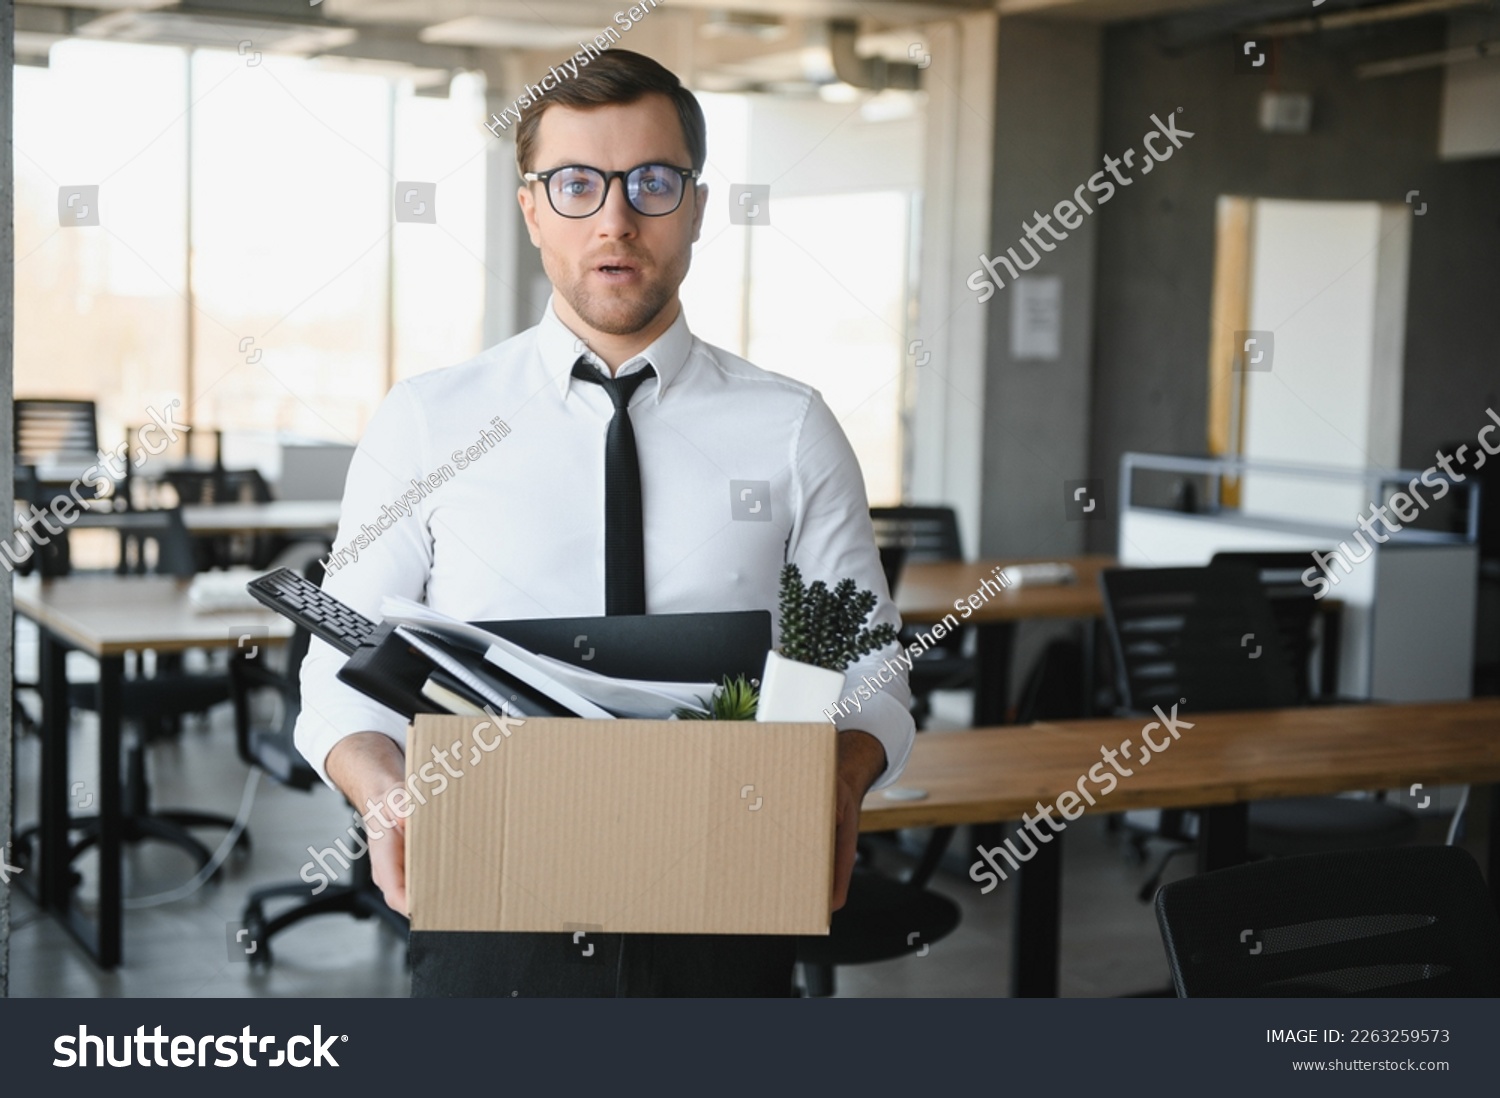 Sad Fired. Let Go Office Worker Packs His Belongings into Cardboard Box and Leaves Office. Workforce Reduction, Downsizing, Reorganization, Restructuring, Outsourcing. Mass Unemployment Market Crisis. #2263259573